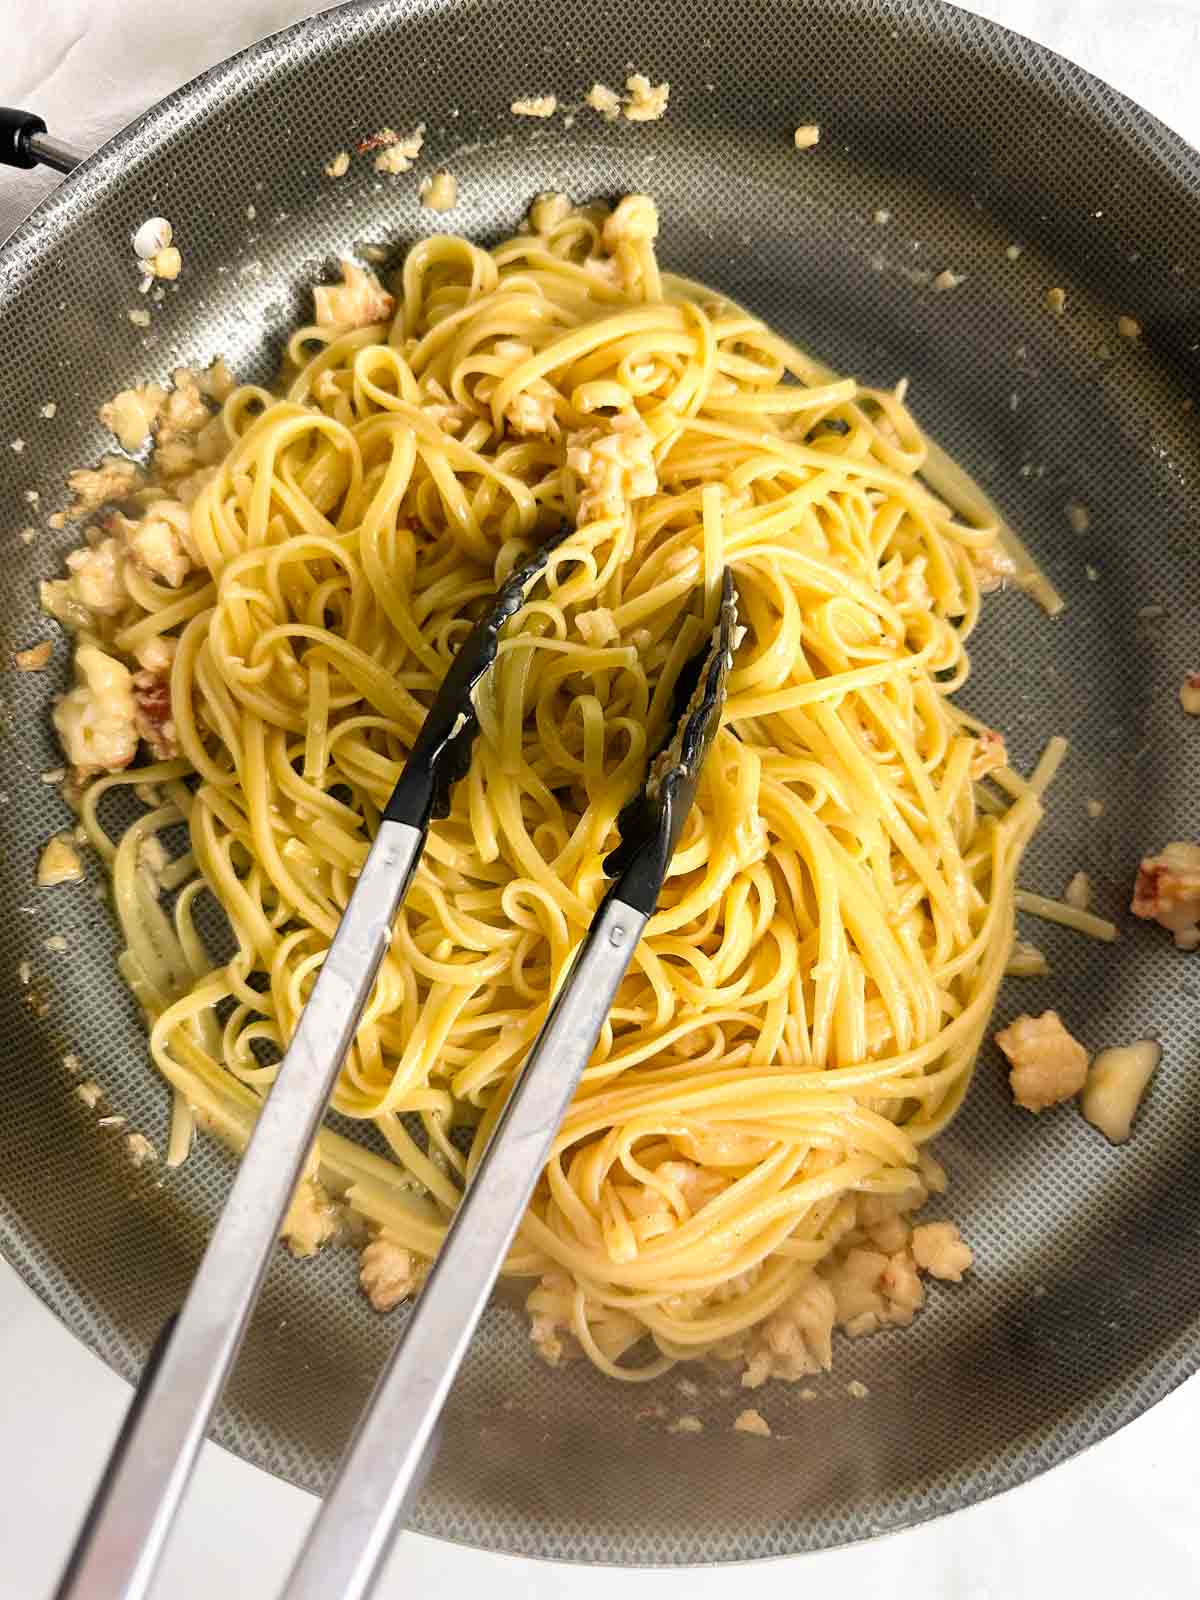 Tossing cooked linguine noodles with lobster pieces in a sauce pan.